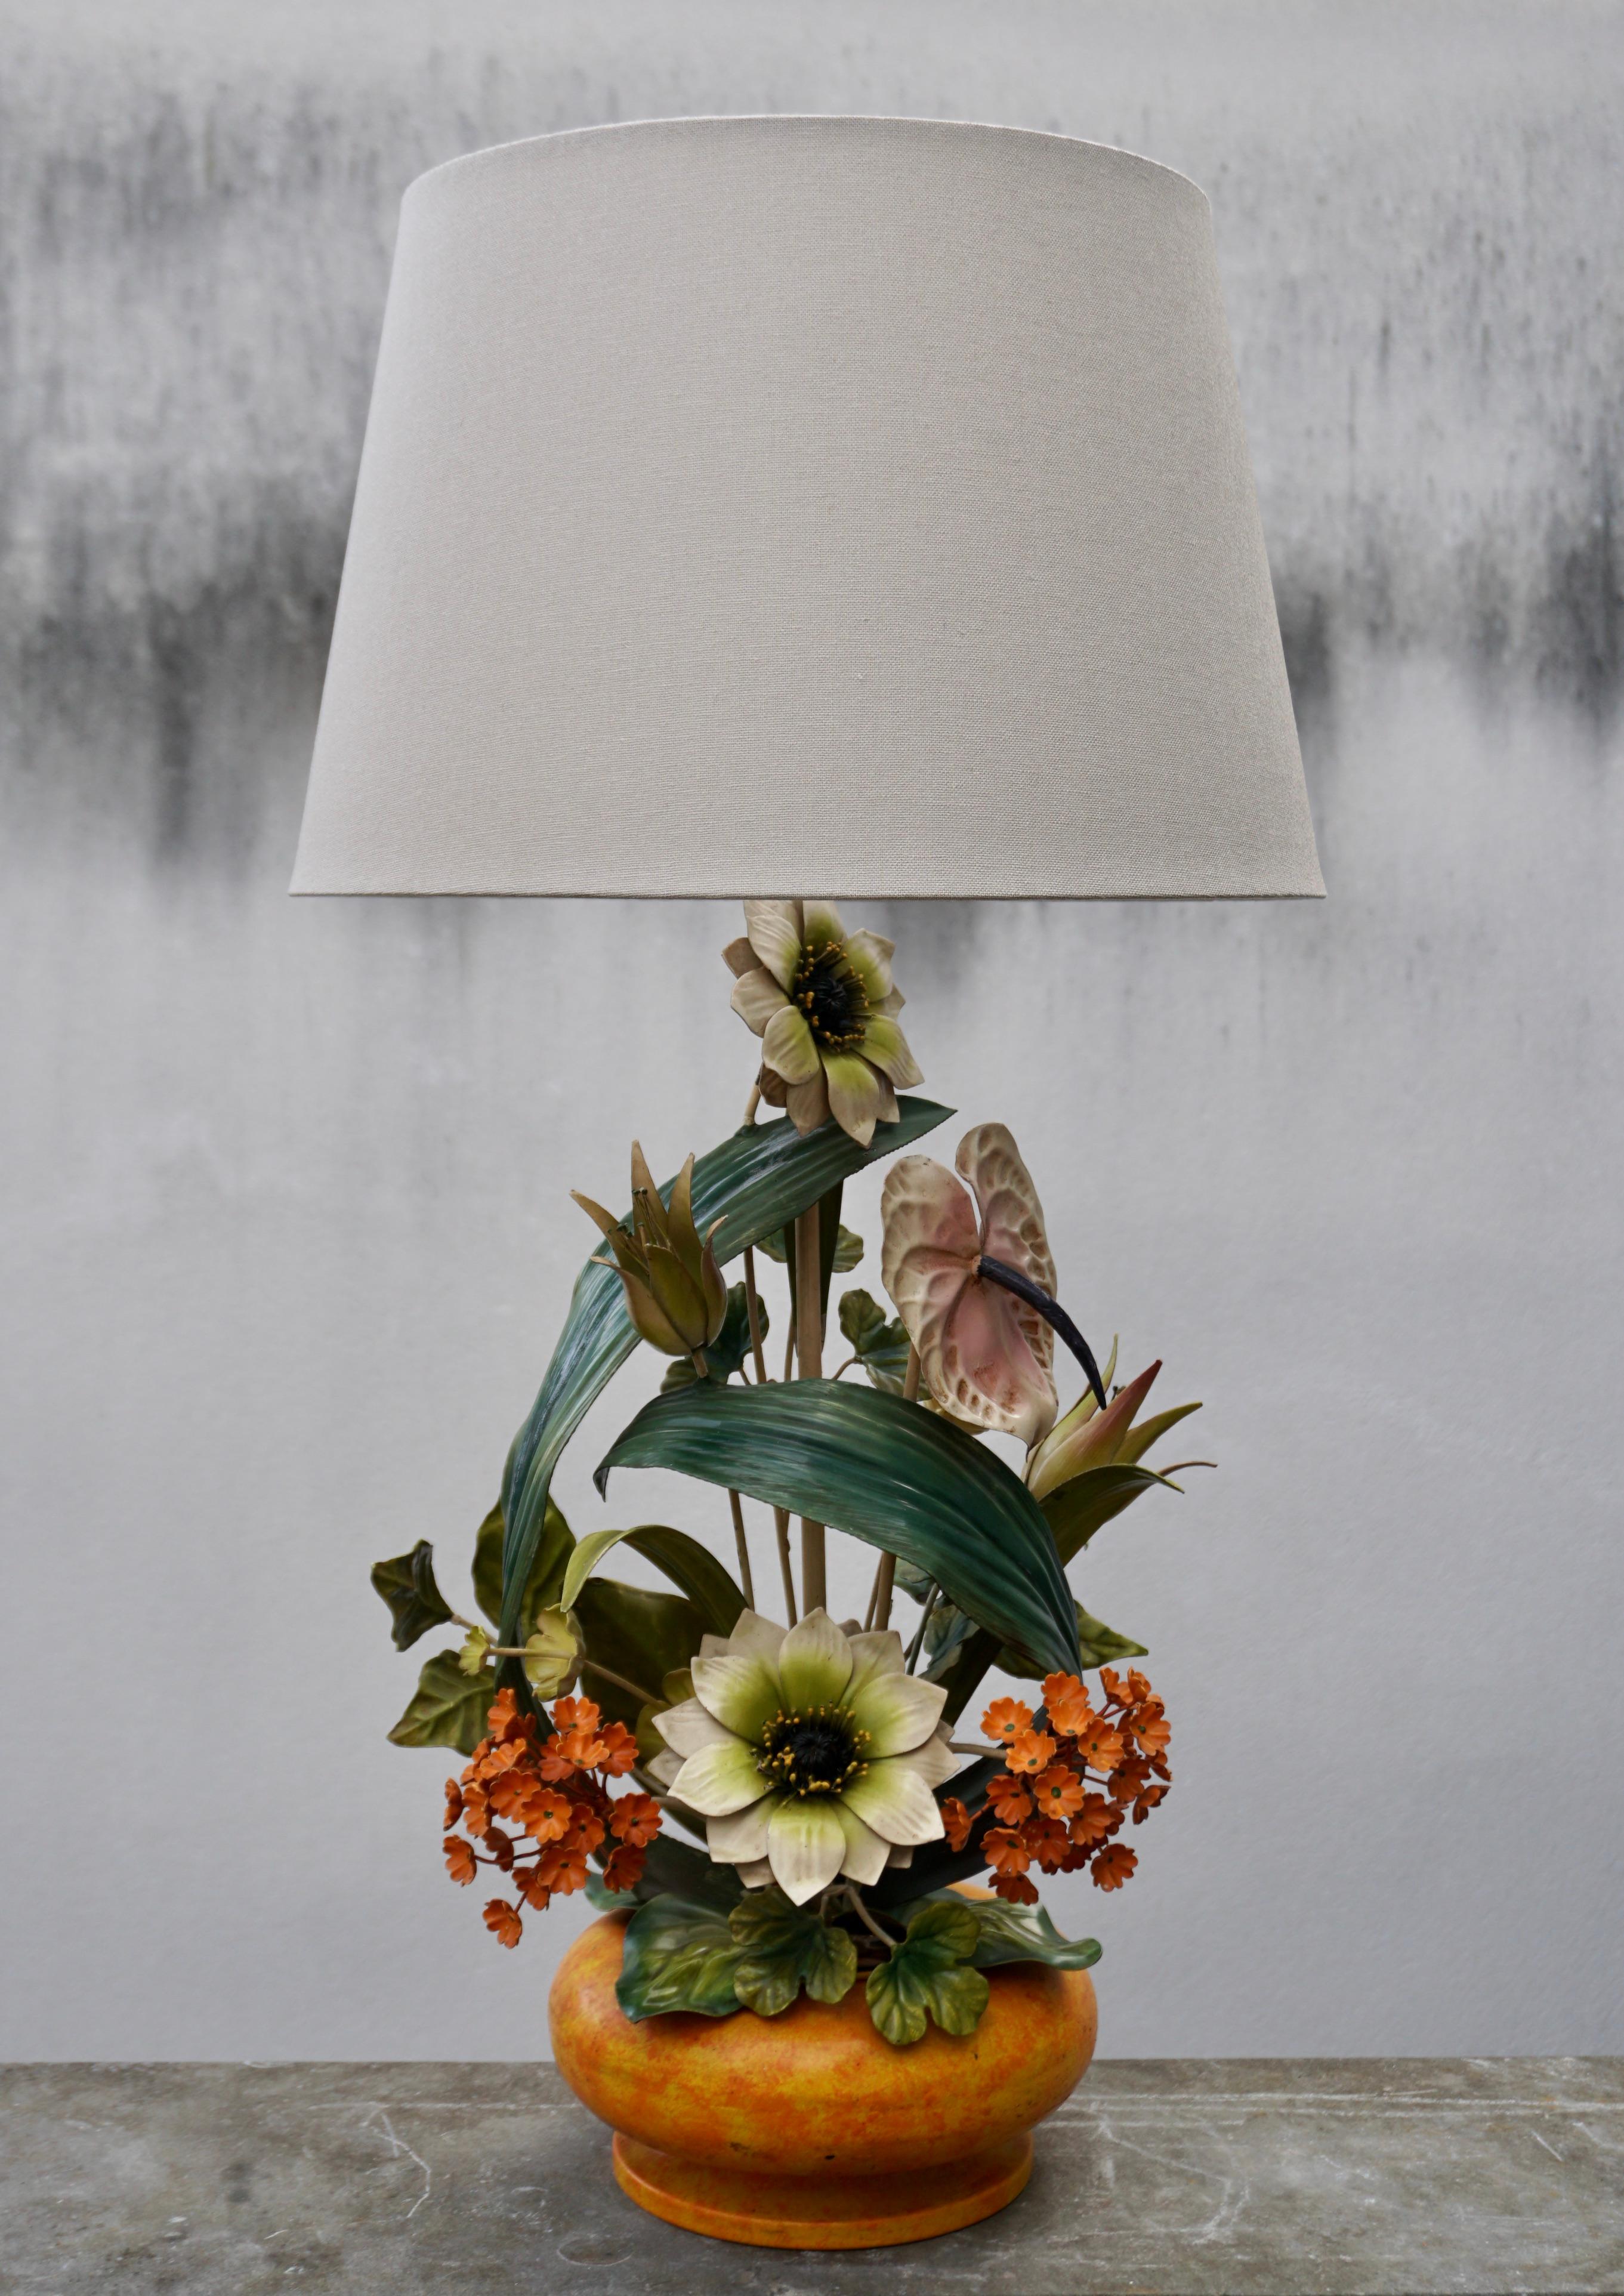 Vintage tole toleware metal art flower table lamp.

This mid century Italian tole table lamp features flowers and leaves.

Height base including fitting 24.8